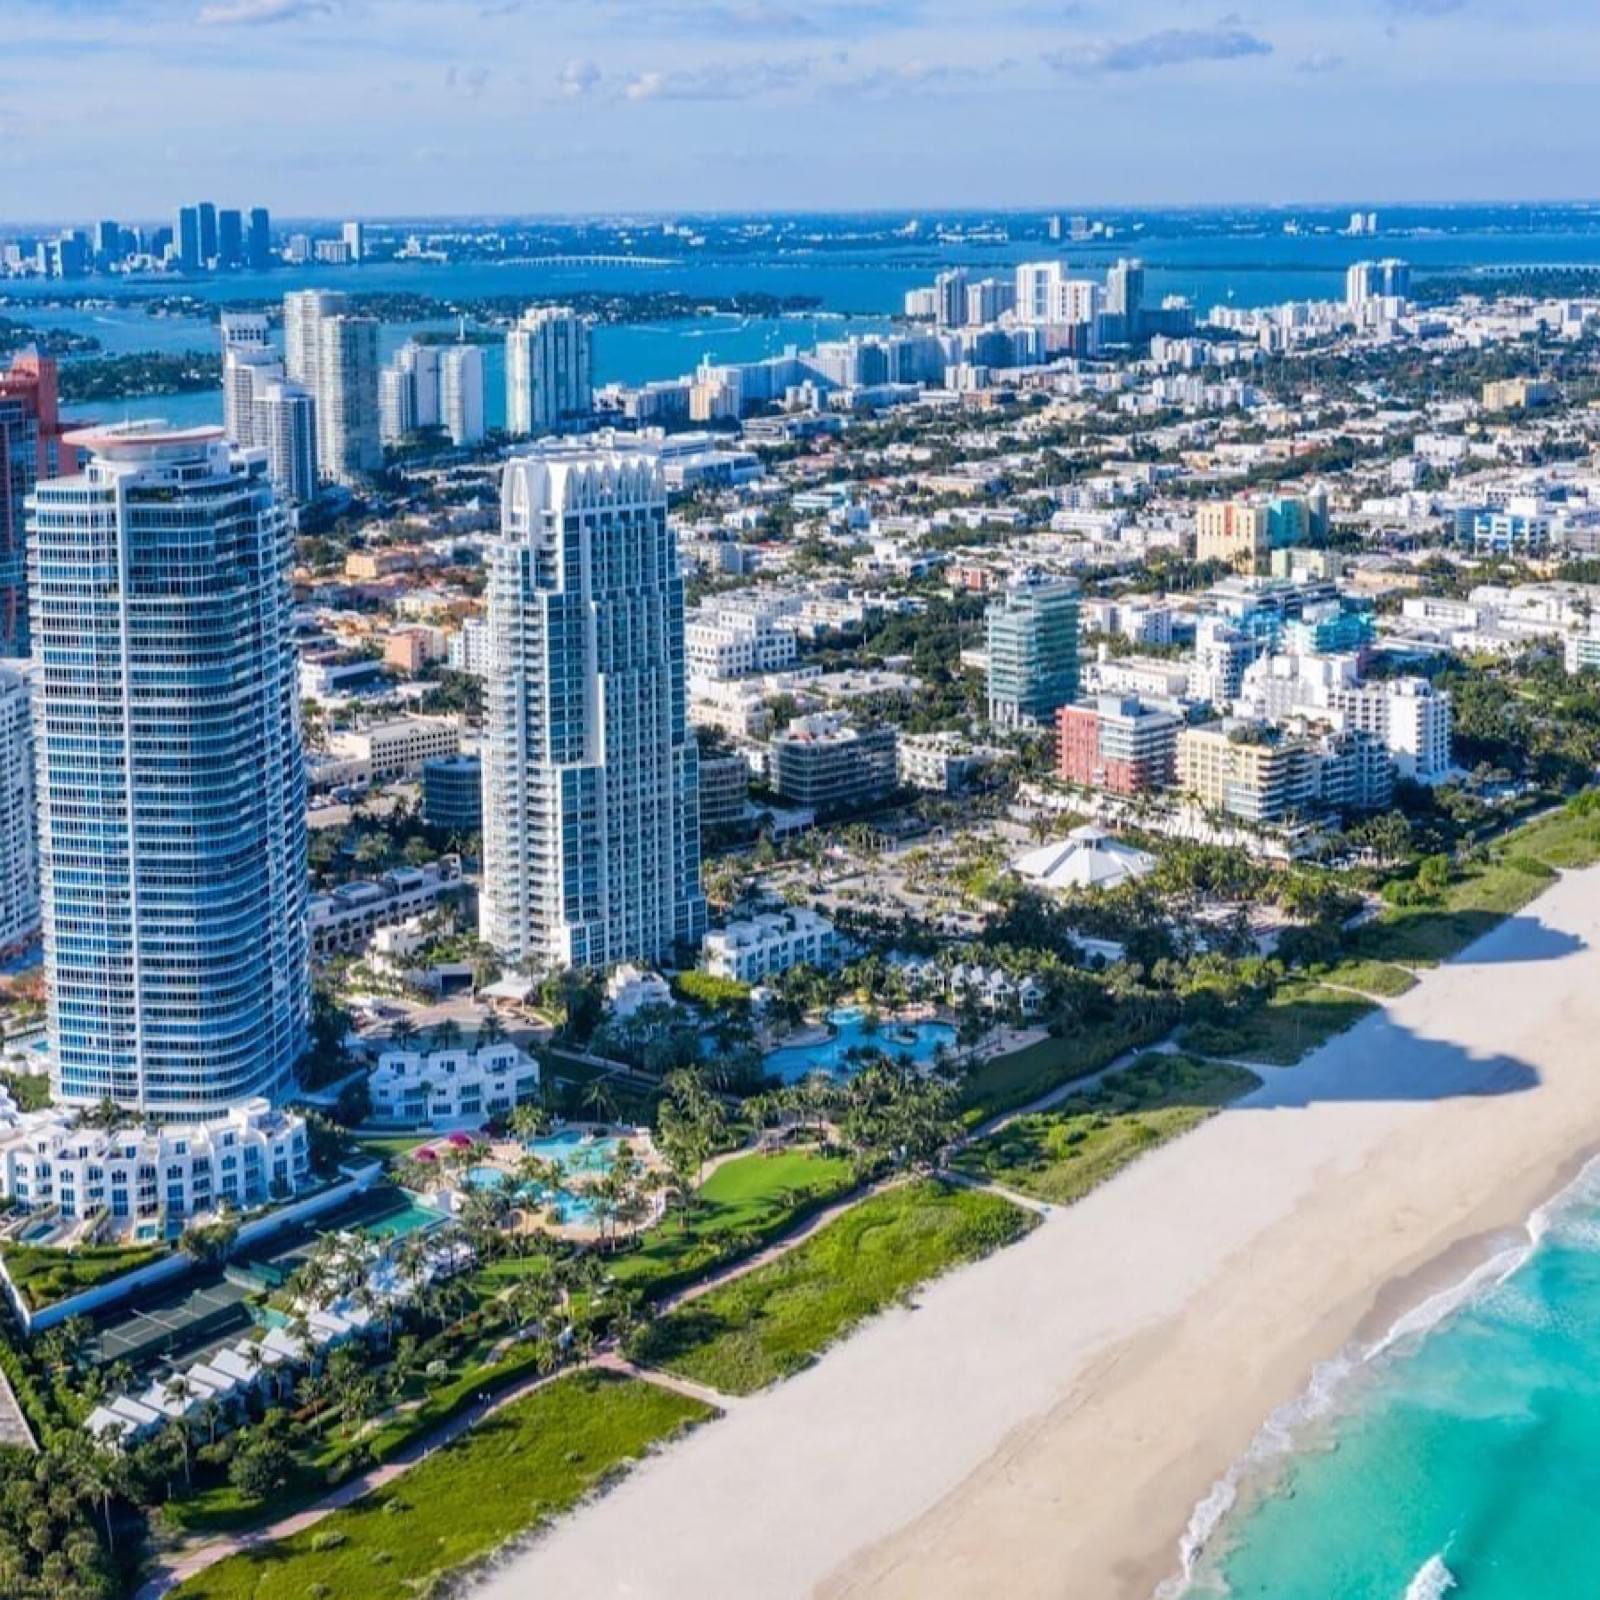 Discover the Magic of Miami: Unwind & Immerse Beyond the Continuum in South Beach